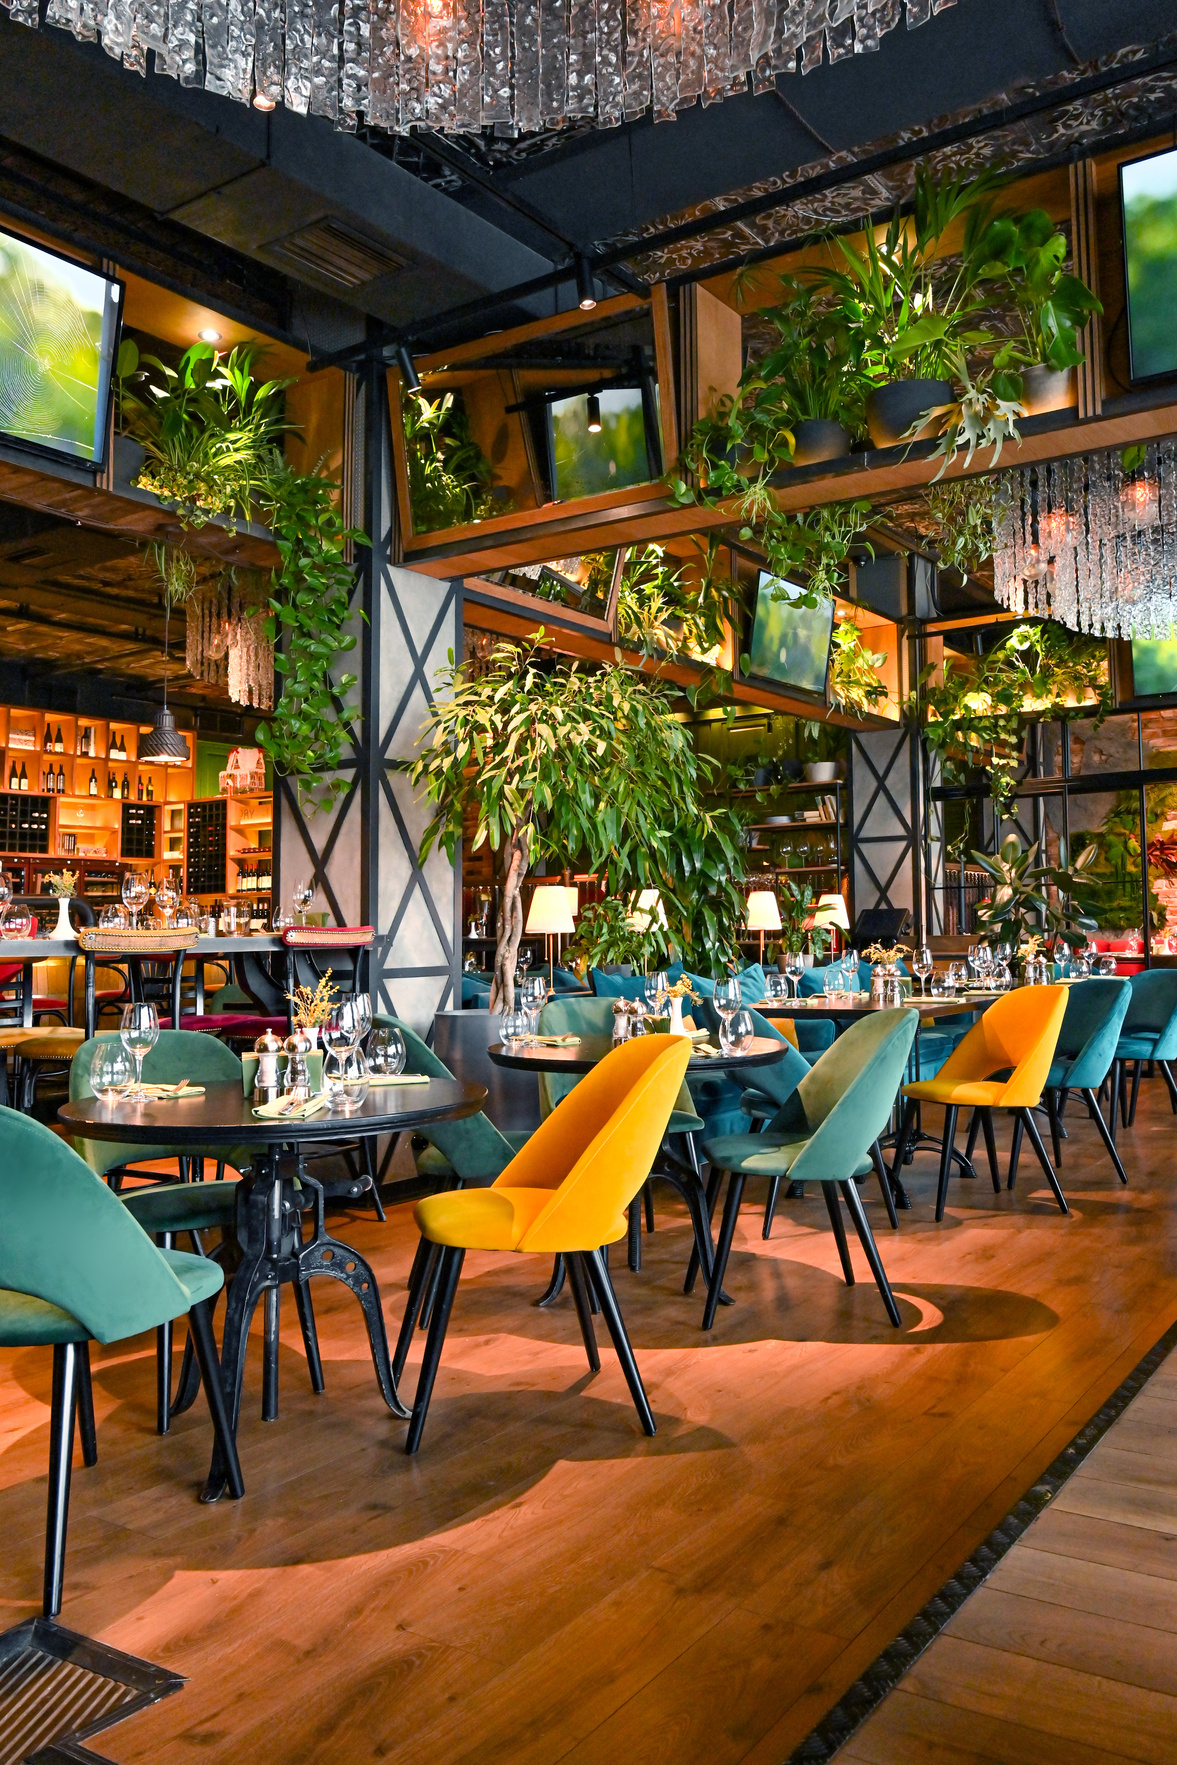 Green and Yellow Chairs and Tables in Restaurant Interior